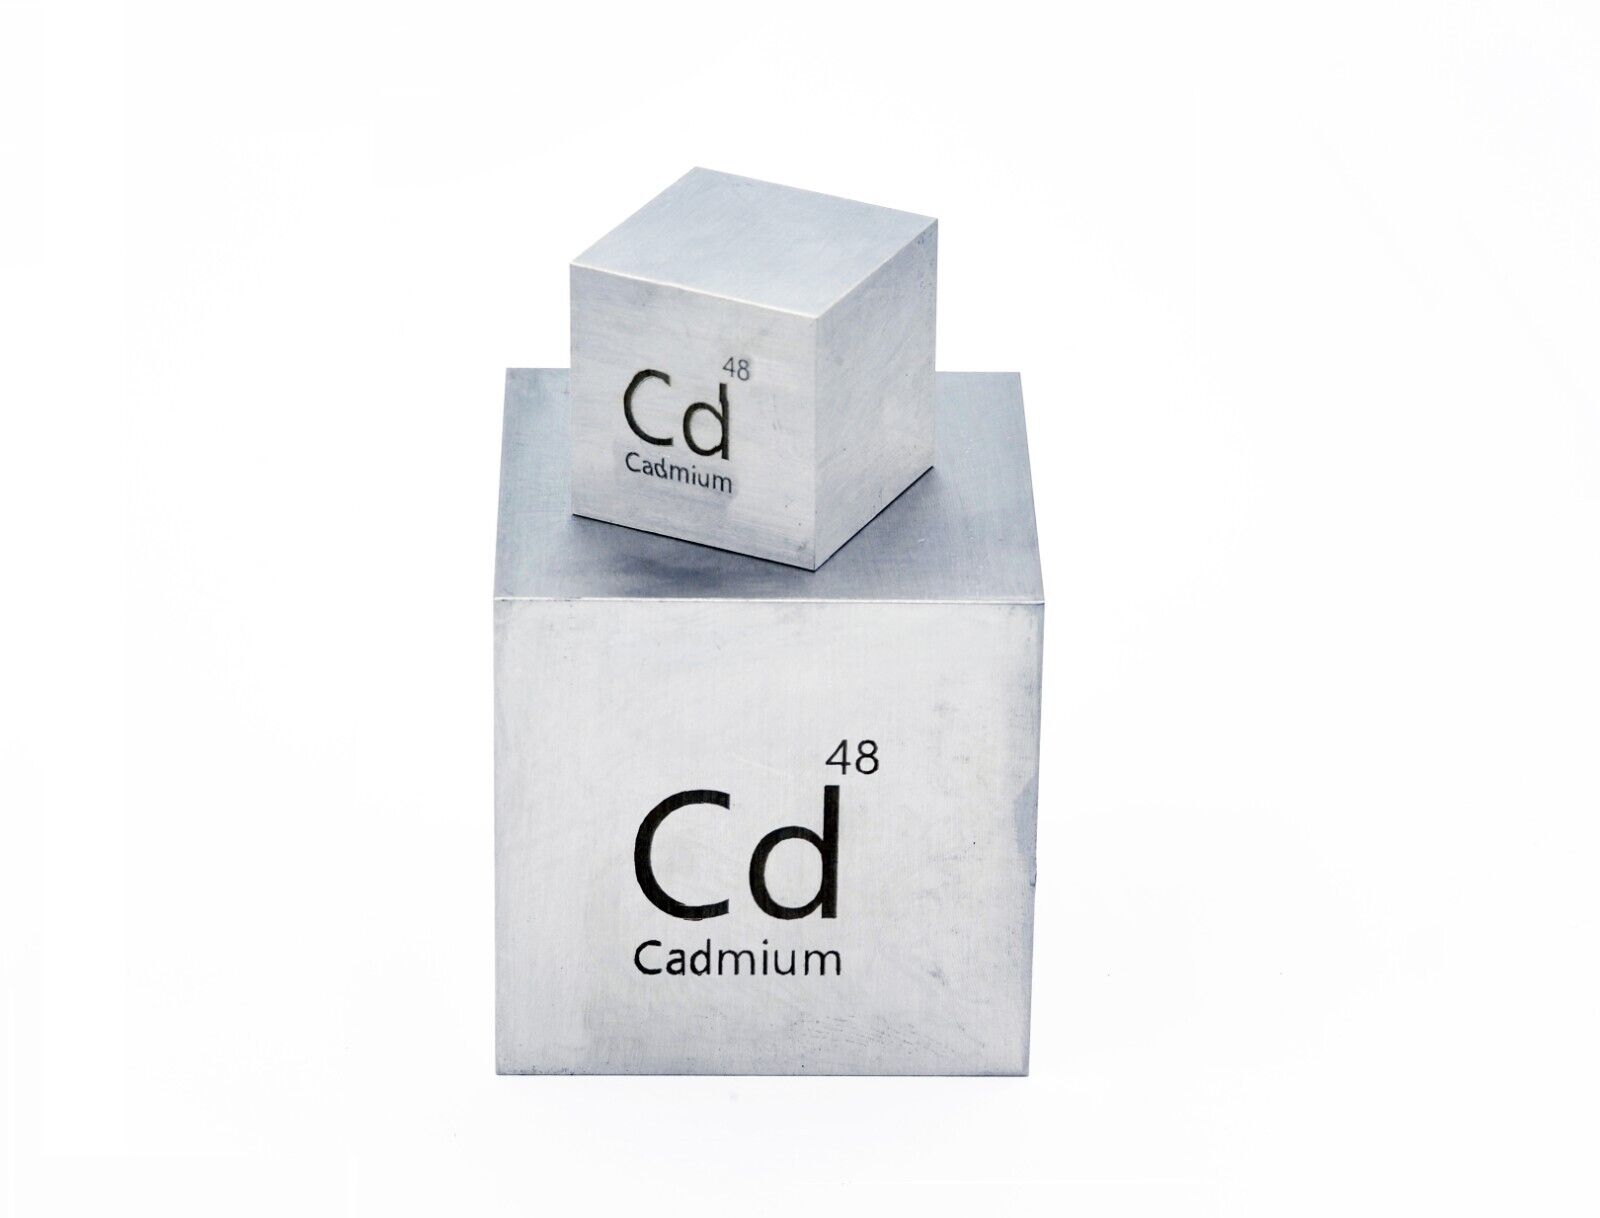 Cadmium Metal 10mm Density Cube 99.9% for Element Collection USA SHIPPING